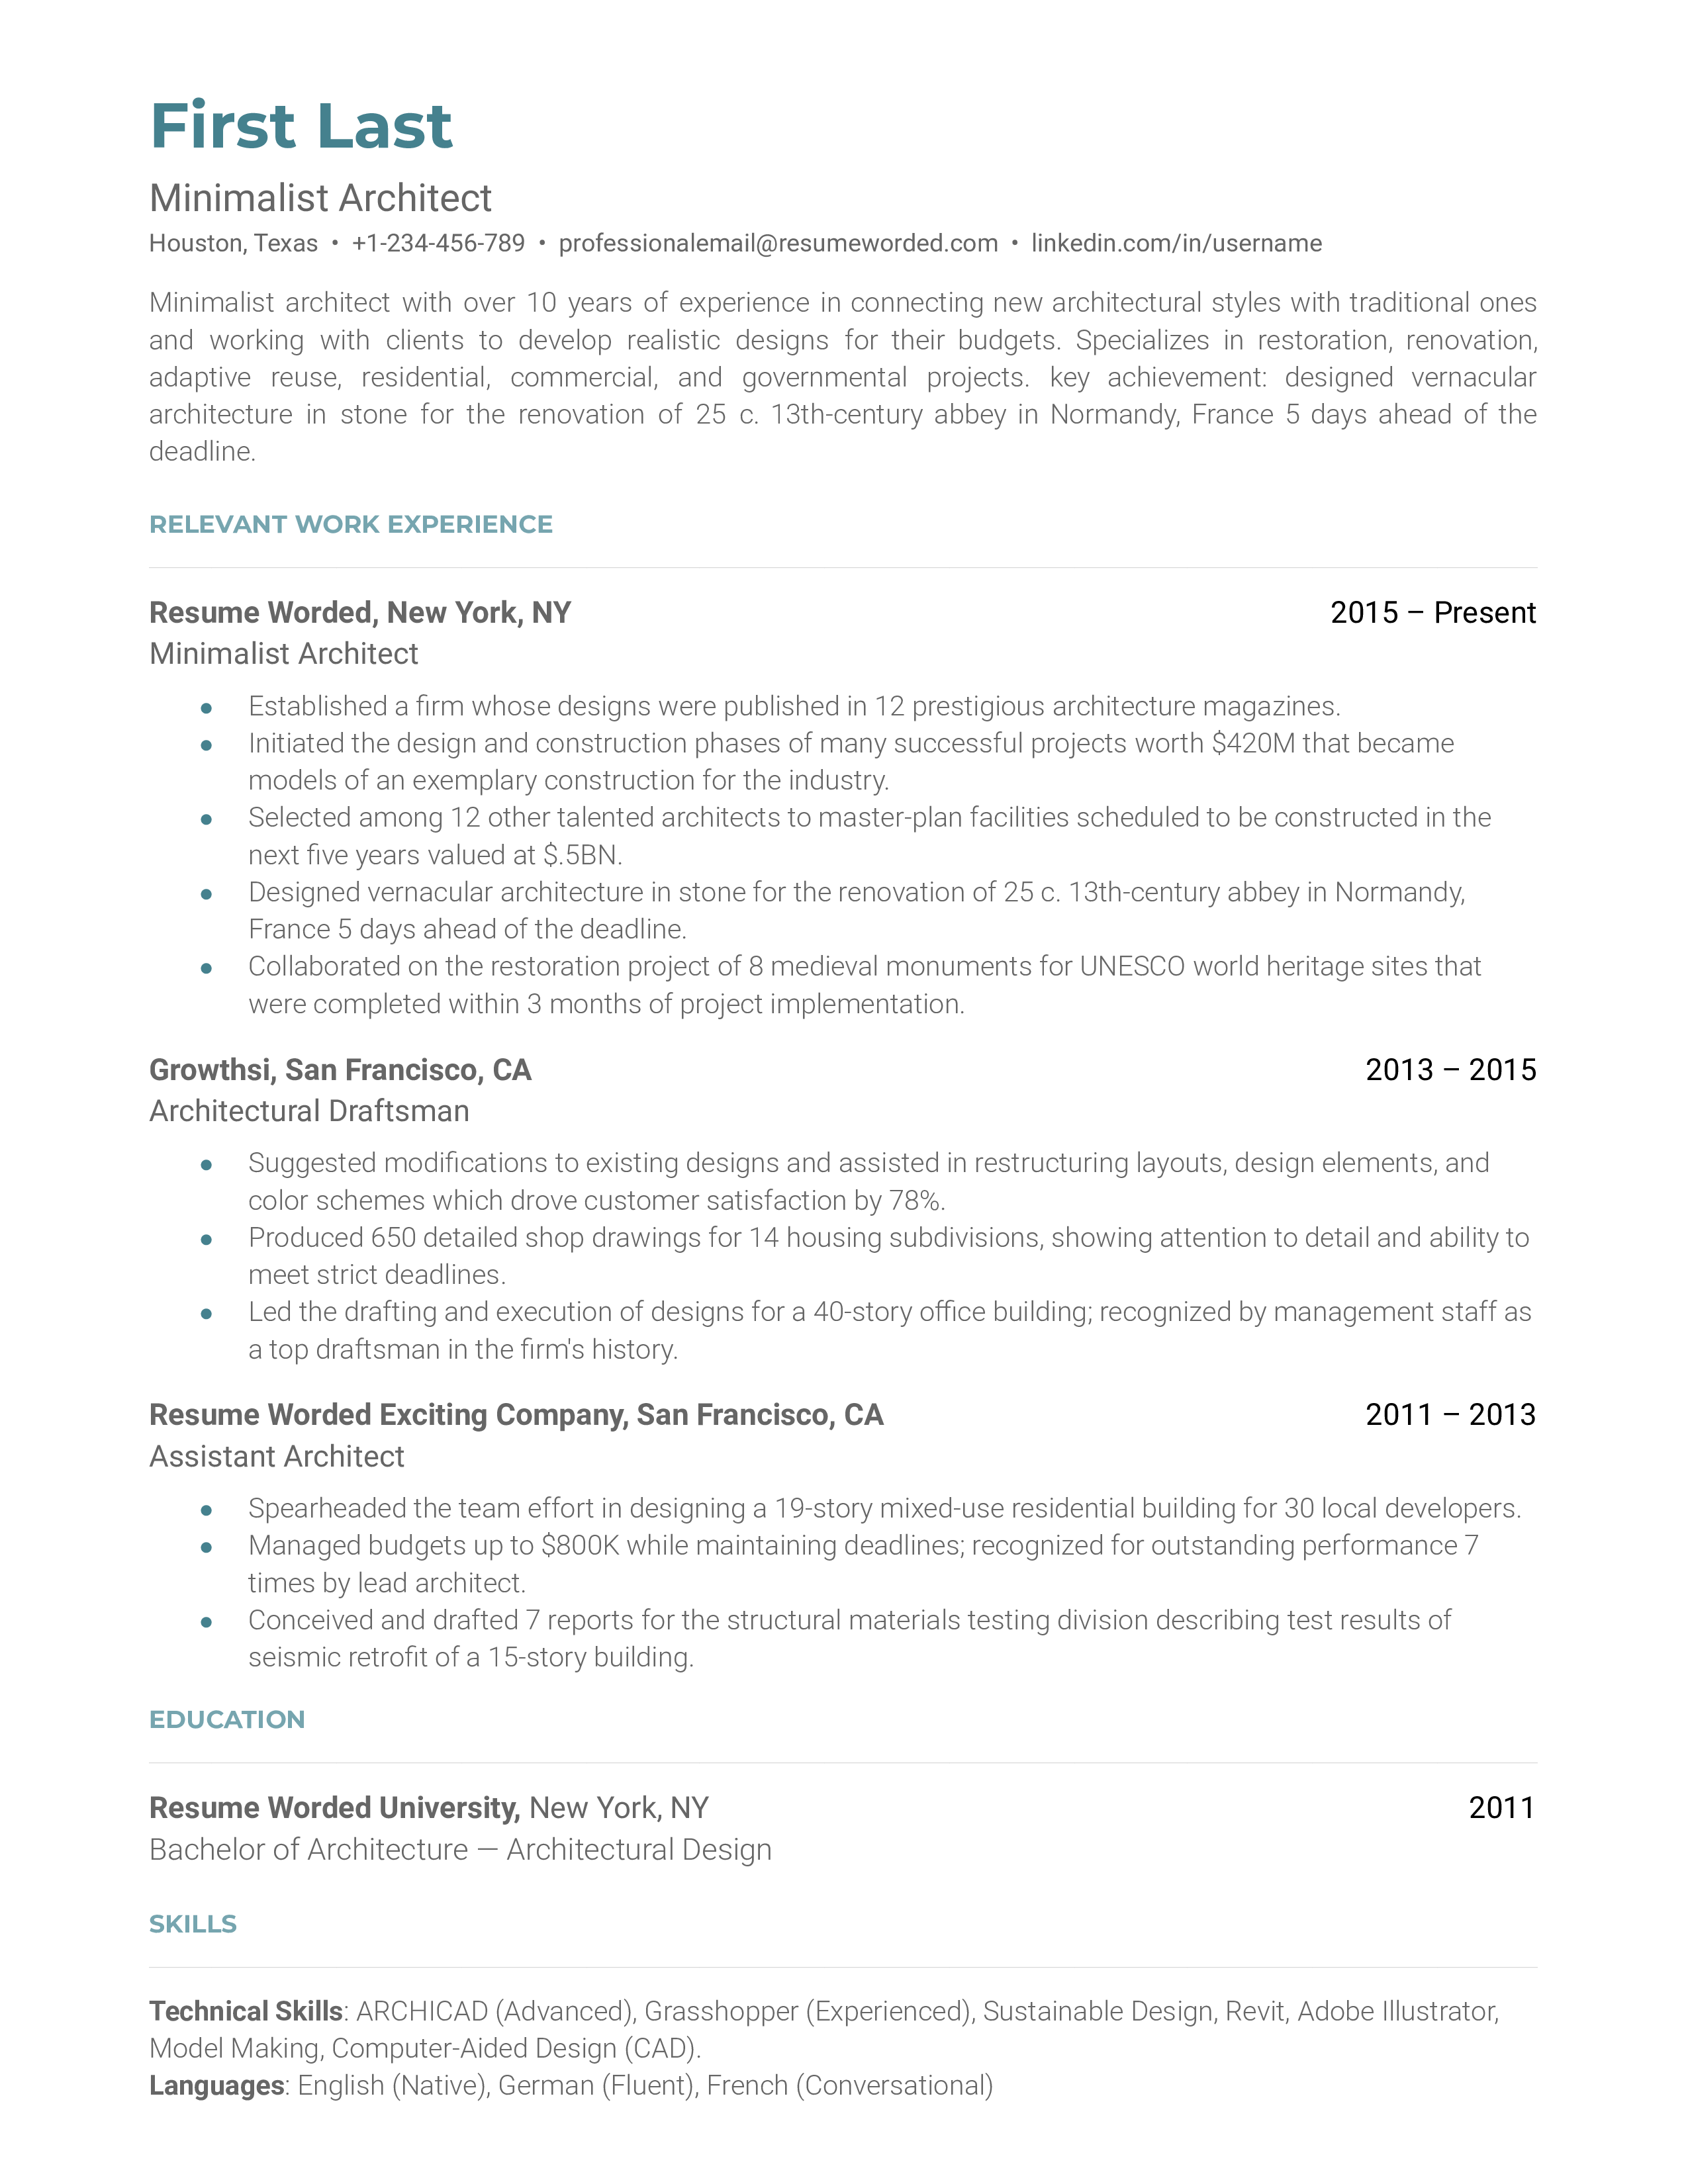 A minimalist architecture resume sample that highlights the applicant’s minimalist experience and impressive achievements.